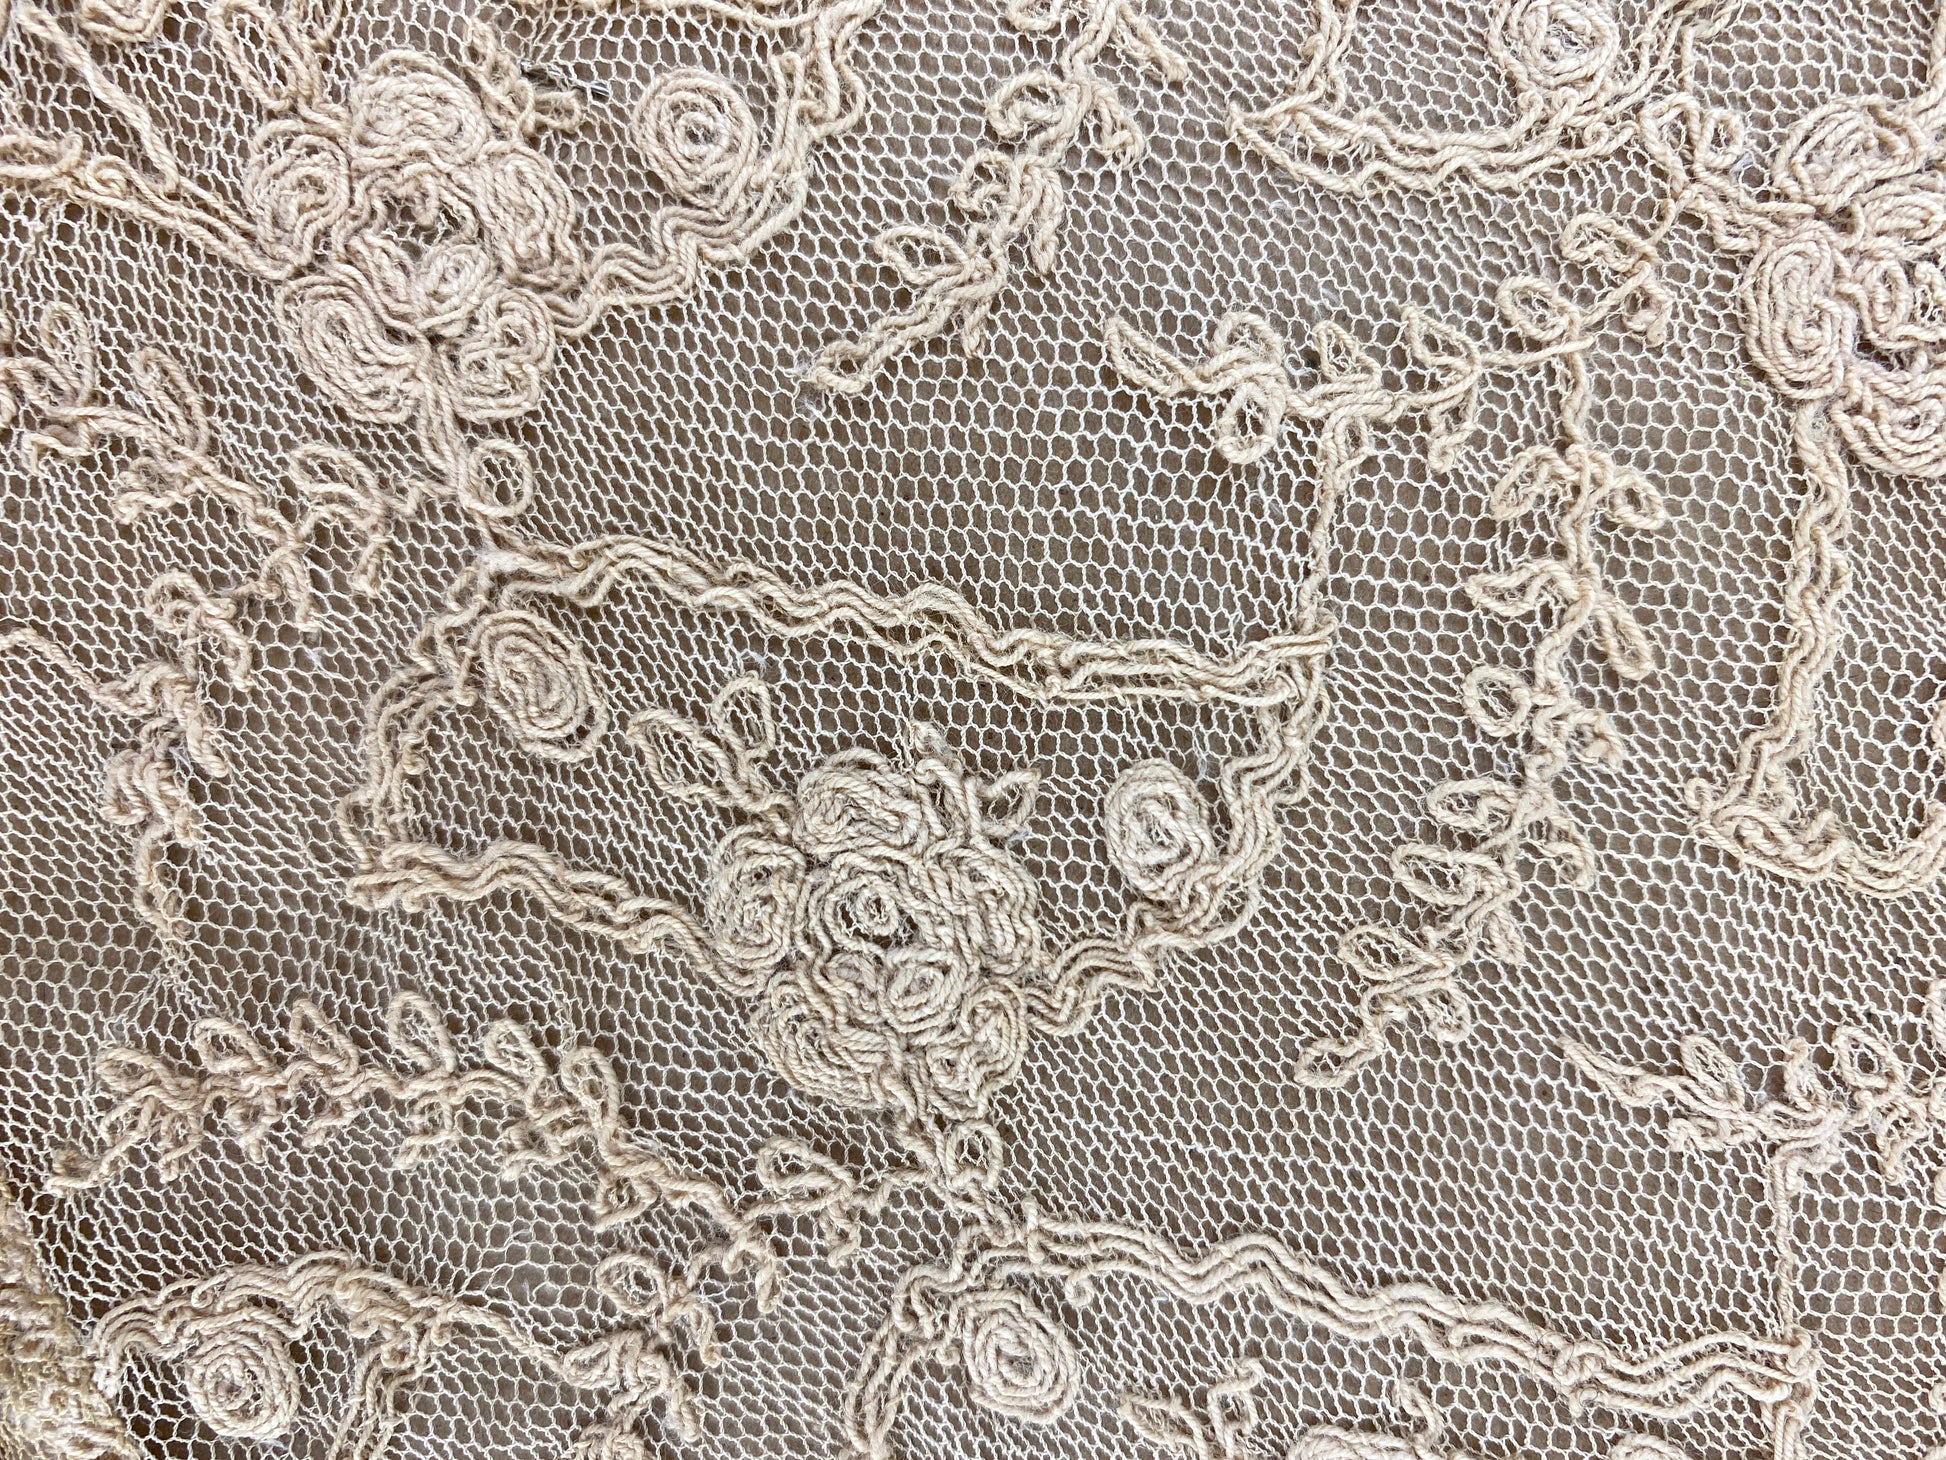 Vintage Handmade Lace Lace Up Cotton & Linen Italy circa 1900